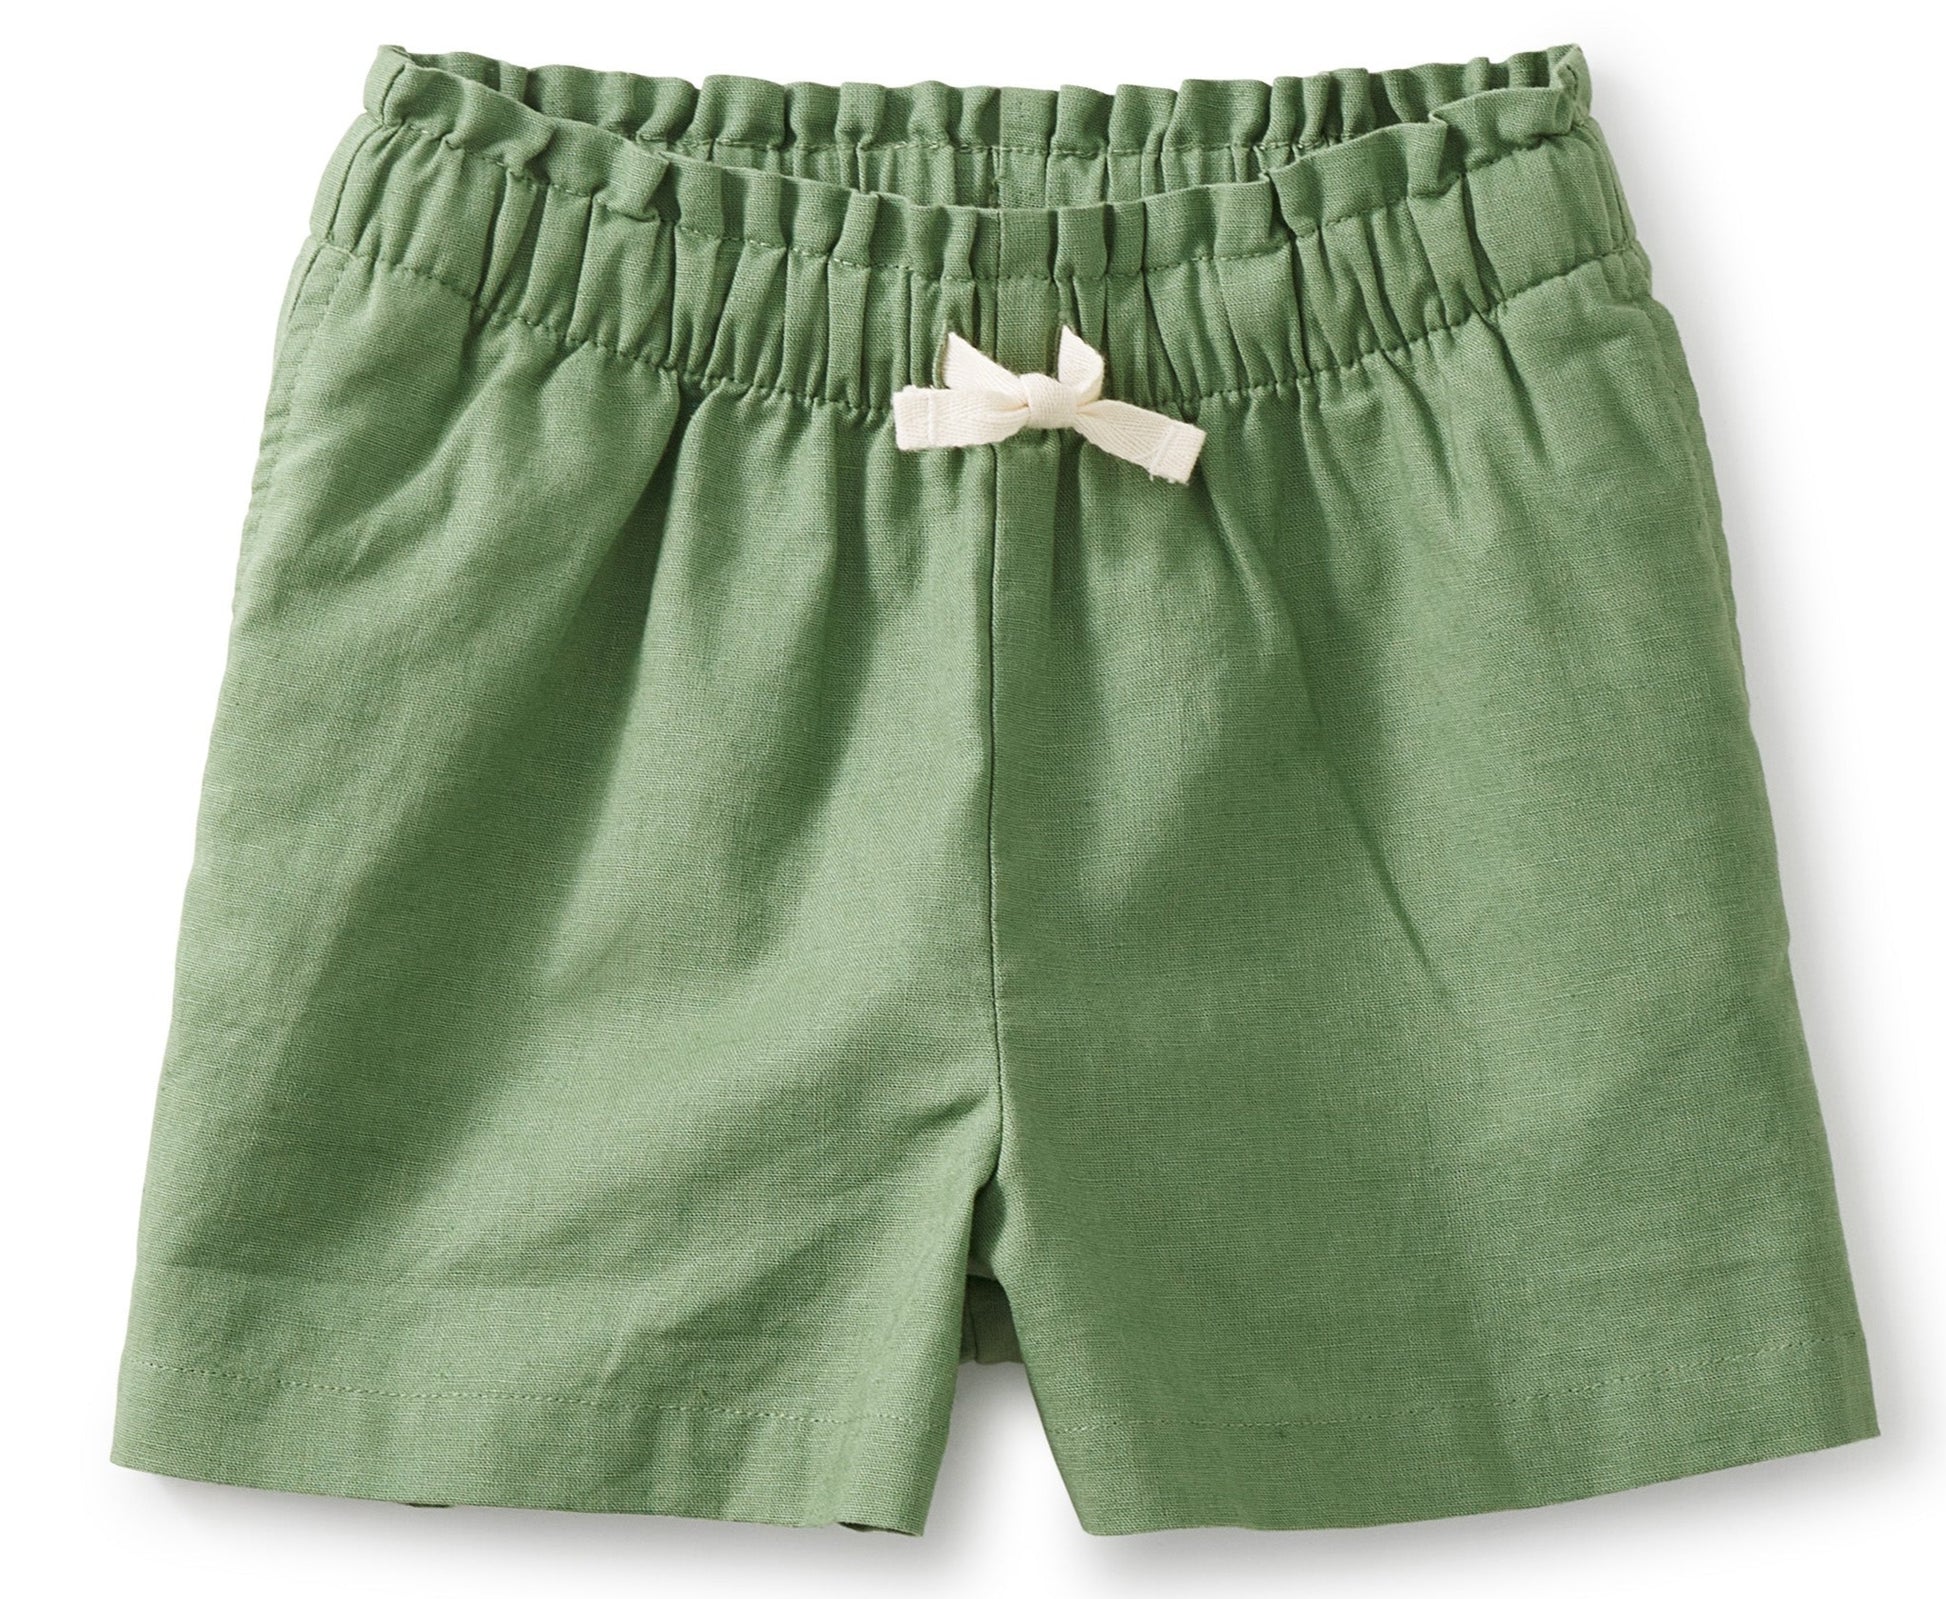 Tea Collection Skipper Shorts - Thyme